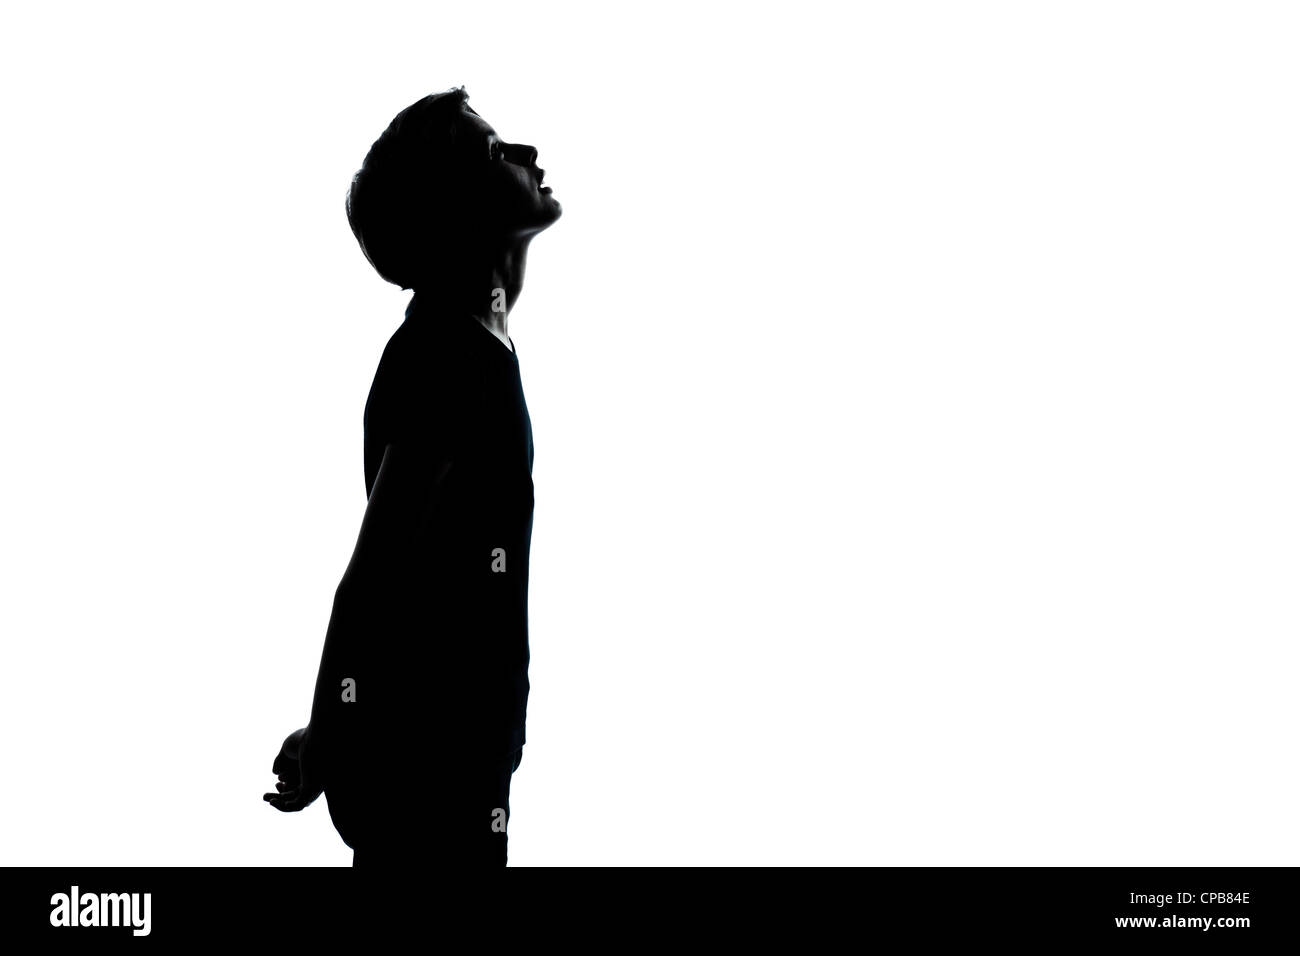 Boy Looking Up Silhouette High Resolution Stock Photography And Images